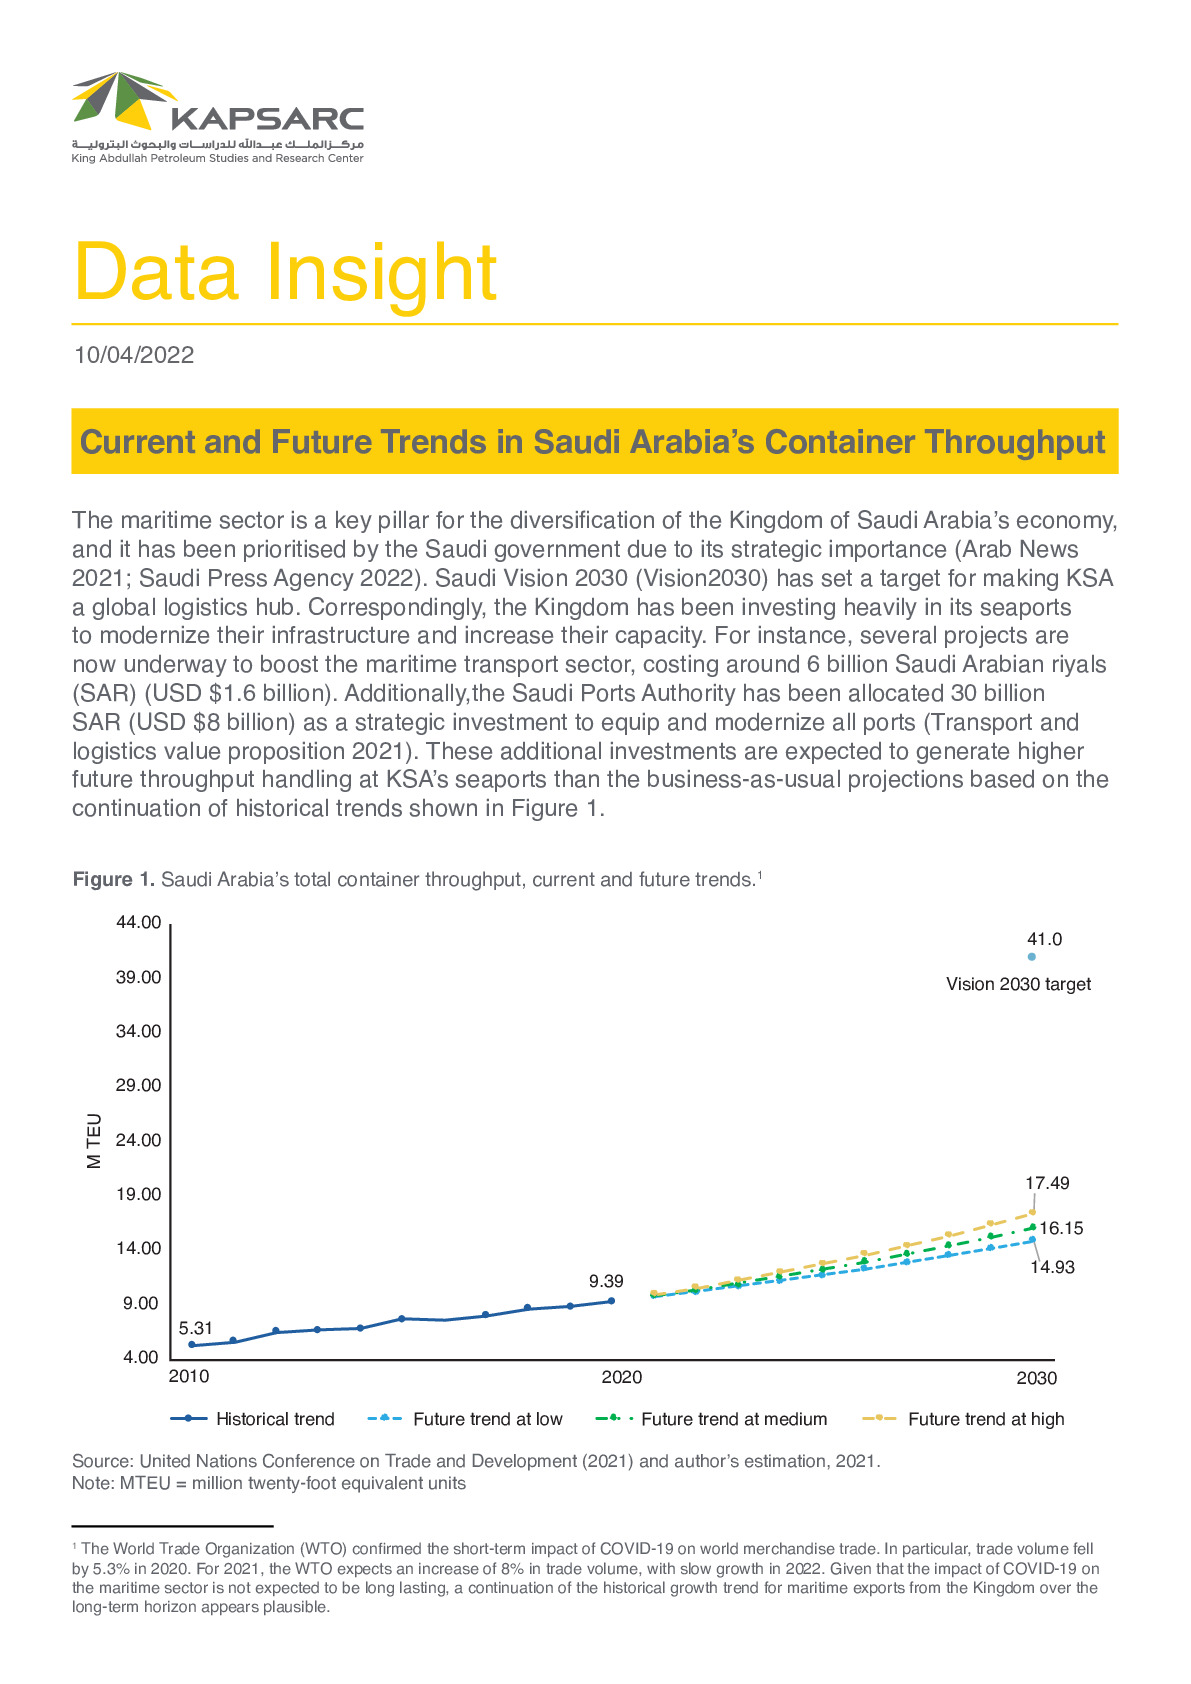 Current and Future Trends in Saudi Arabia’s Container Throughput